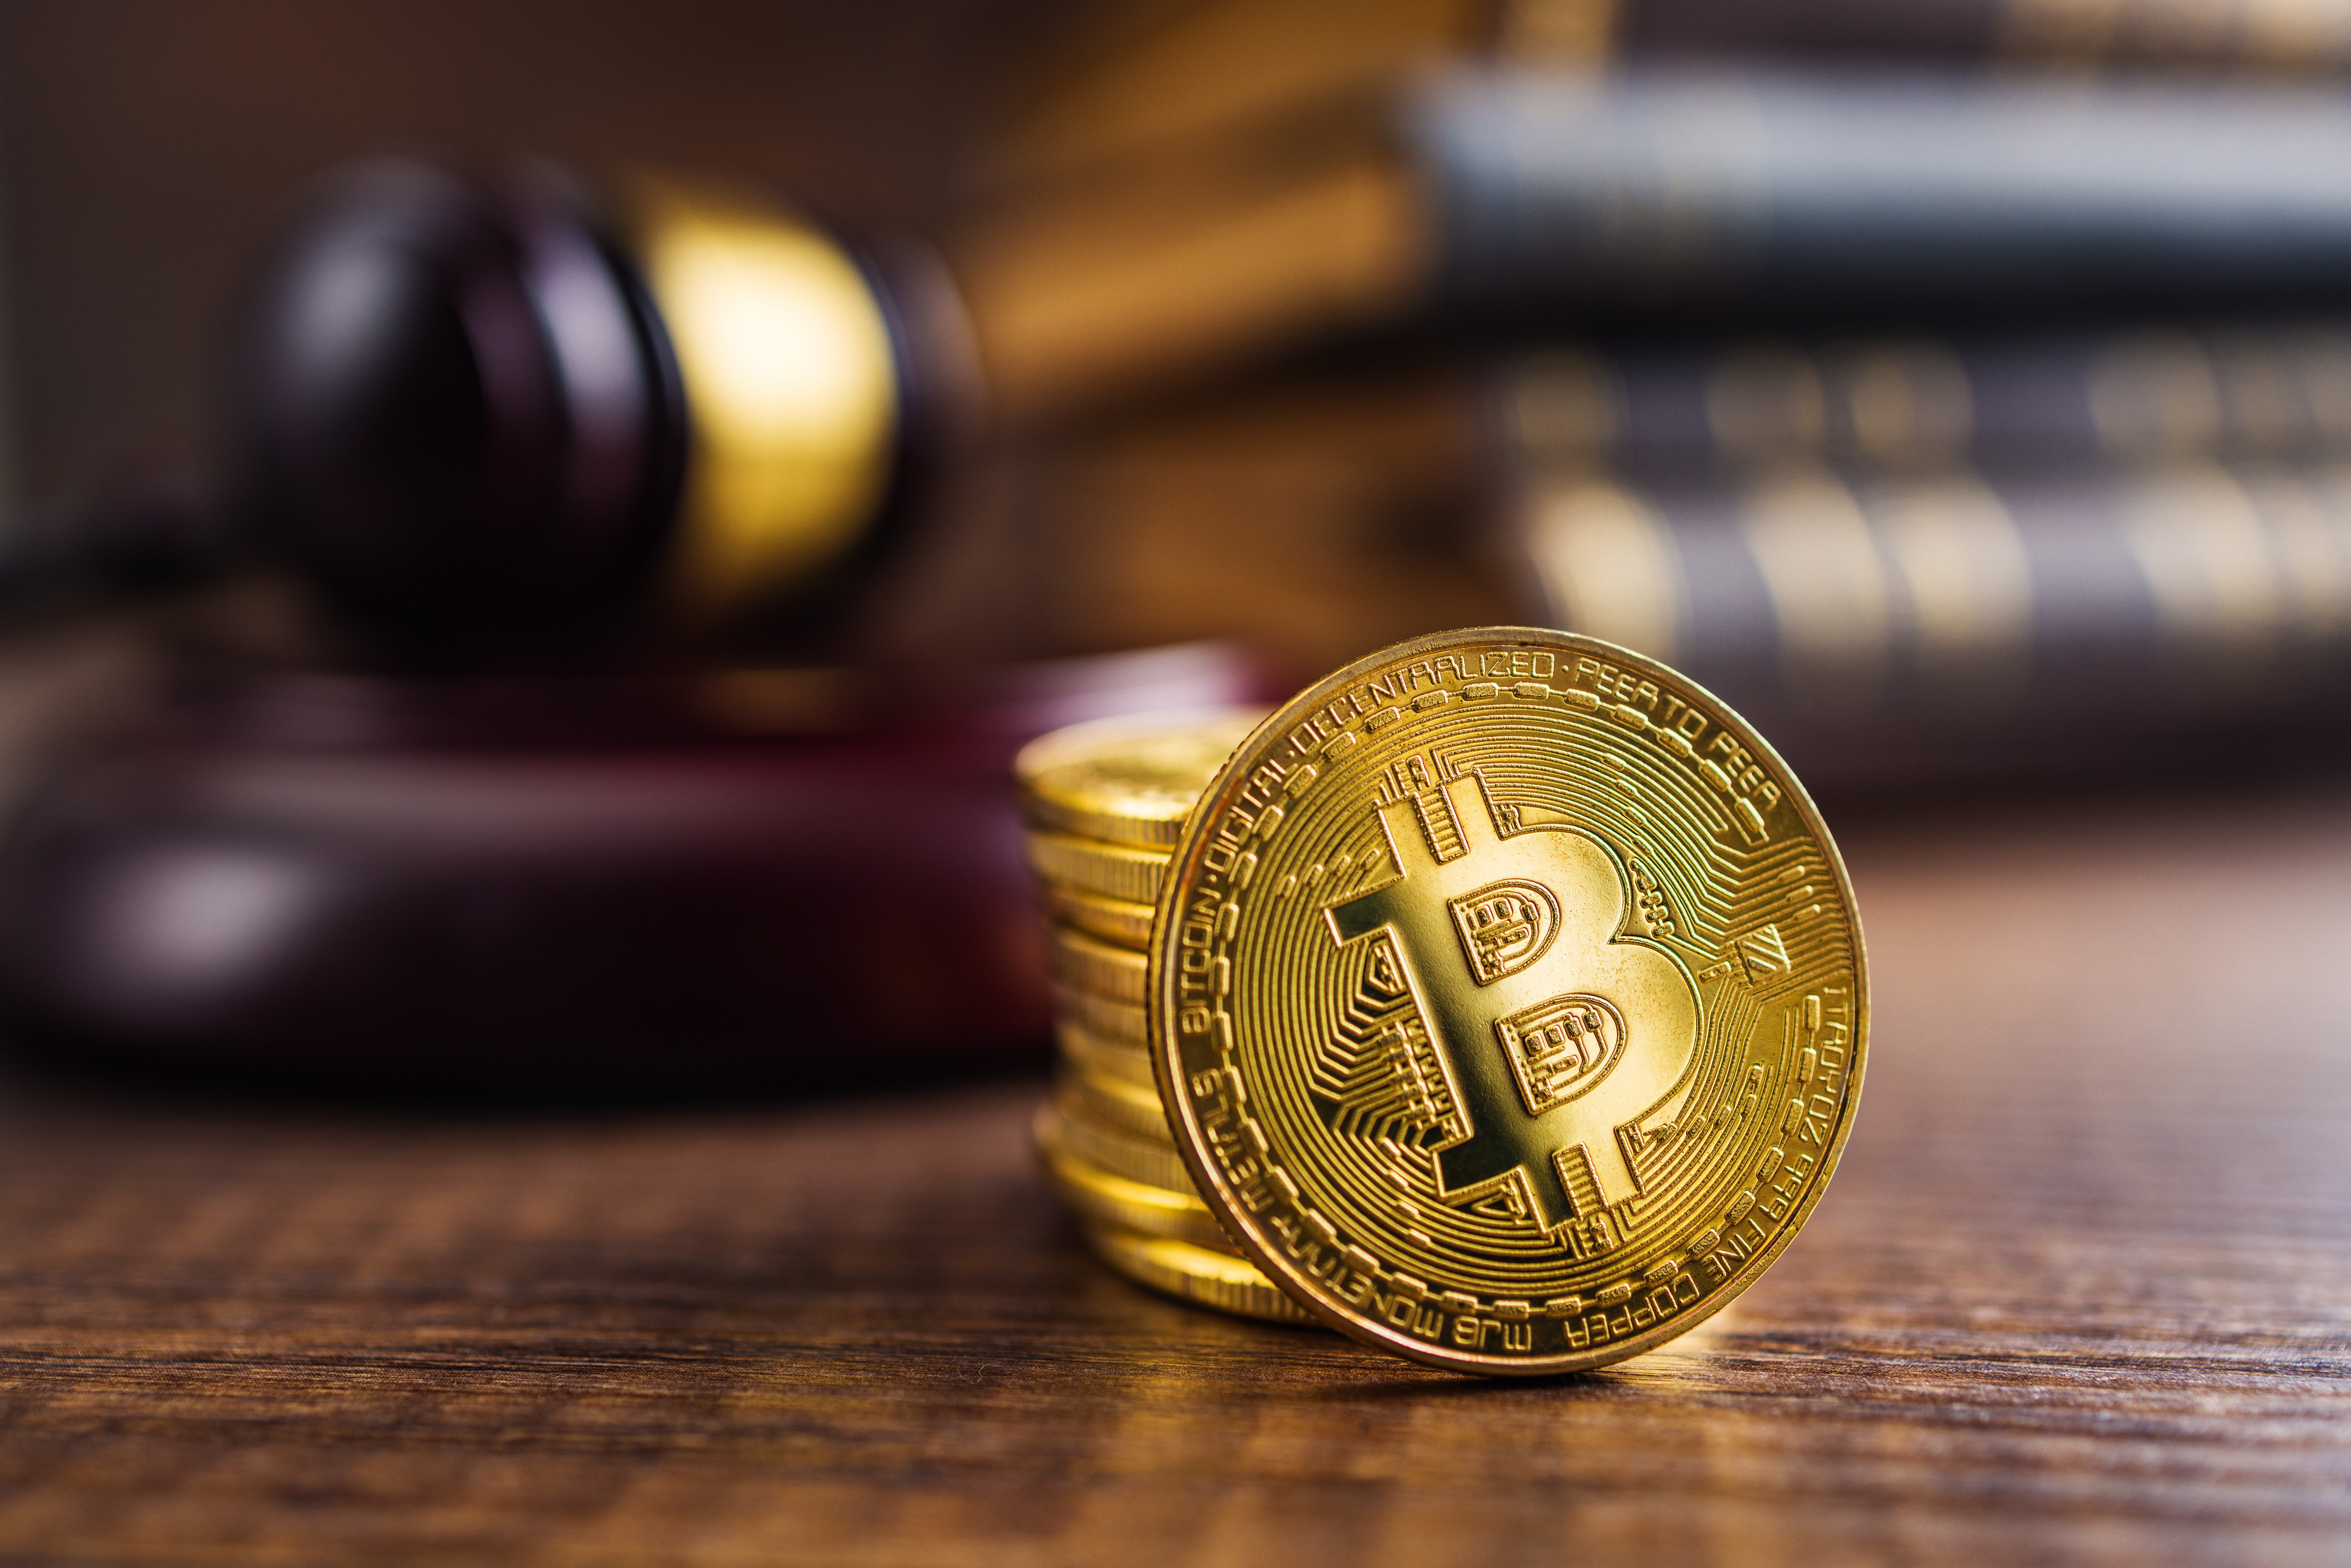 A stack of gold Bitcoins sit on a wooden table in front of a gavel.